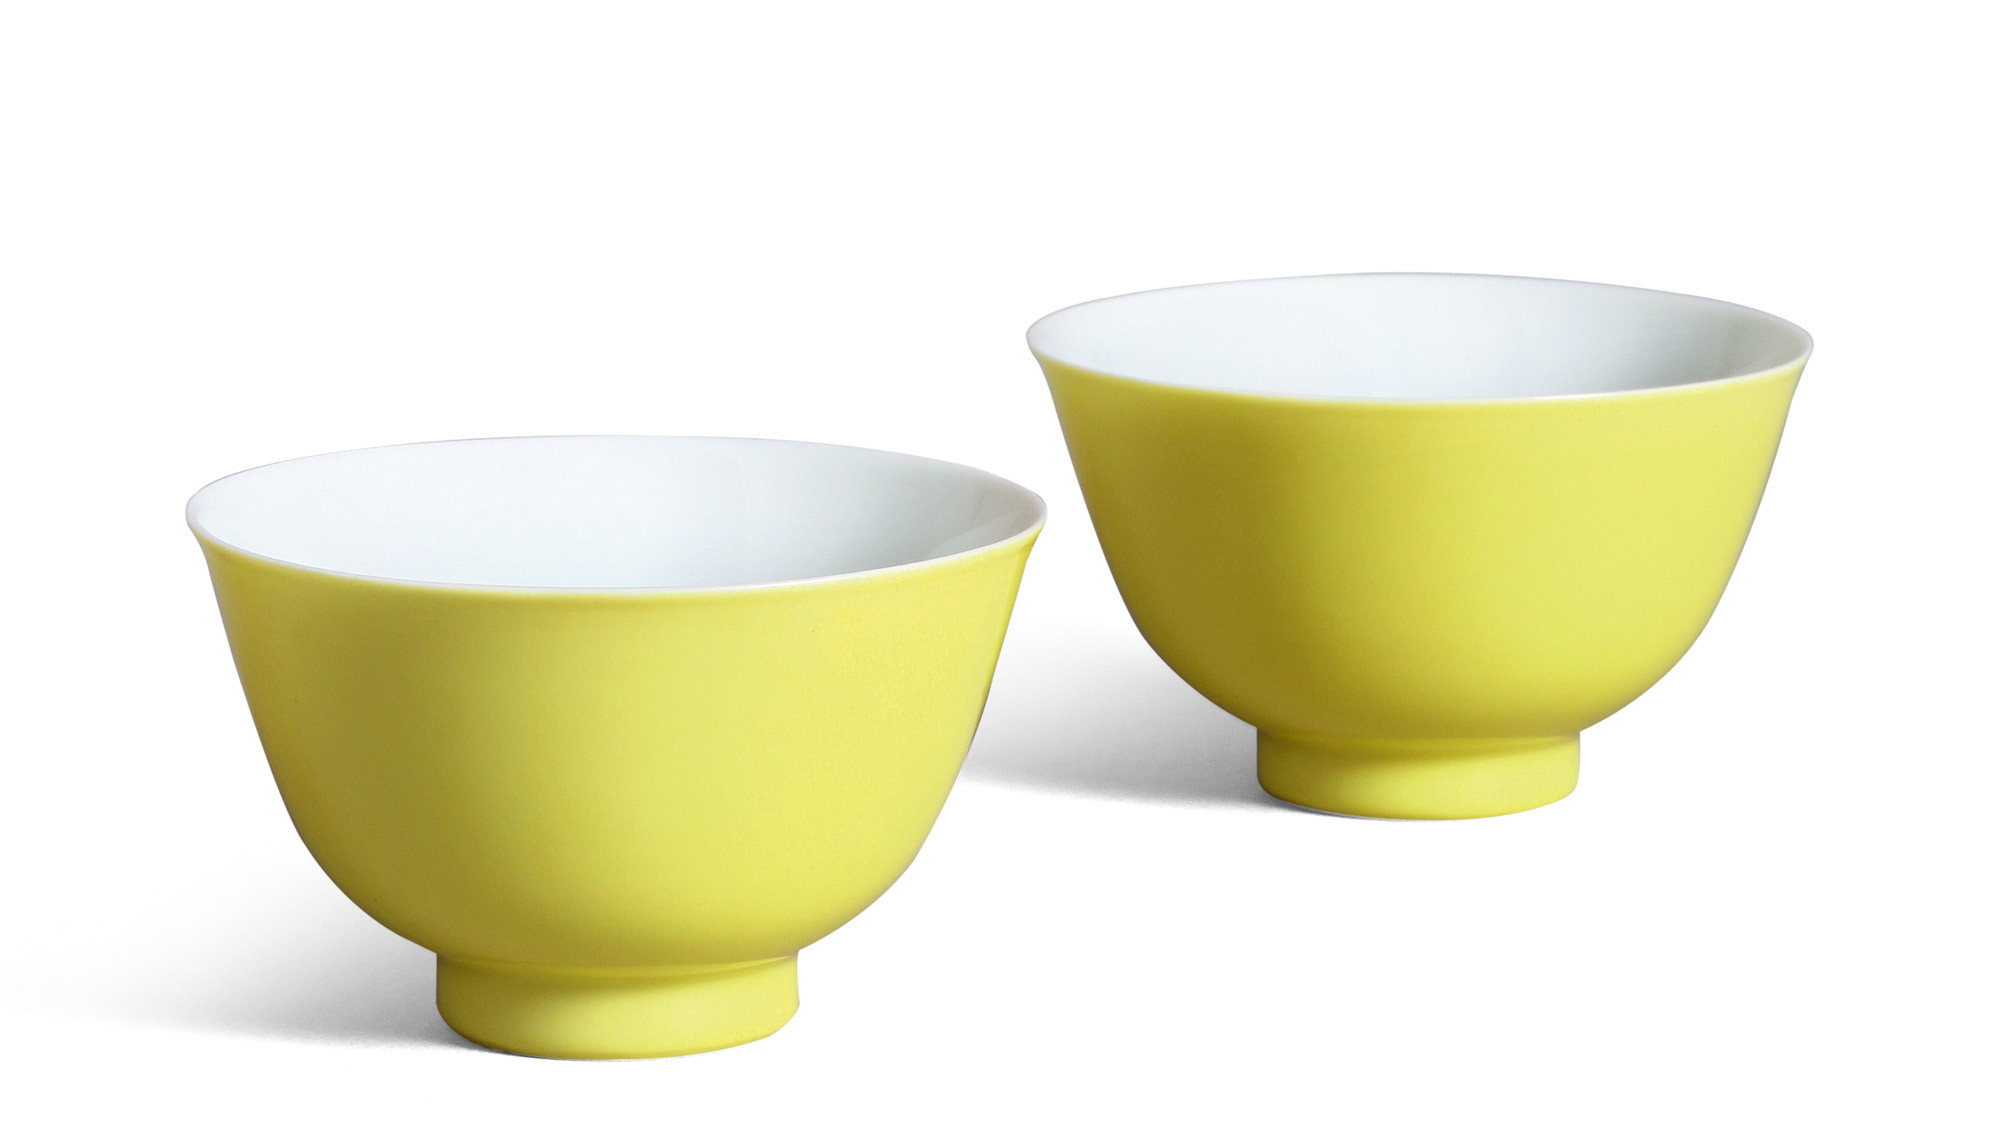 A VERY RARE Pair of LEMON-Yellow GLAZED Cups